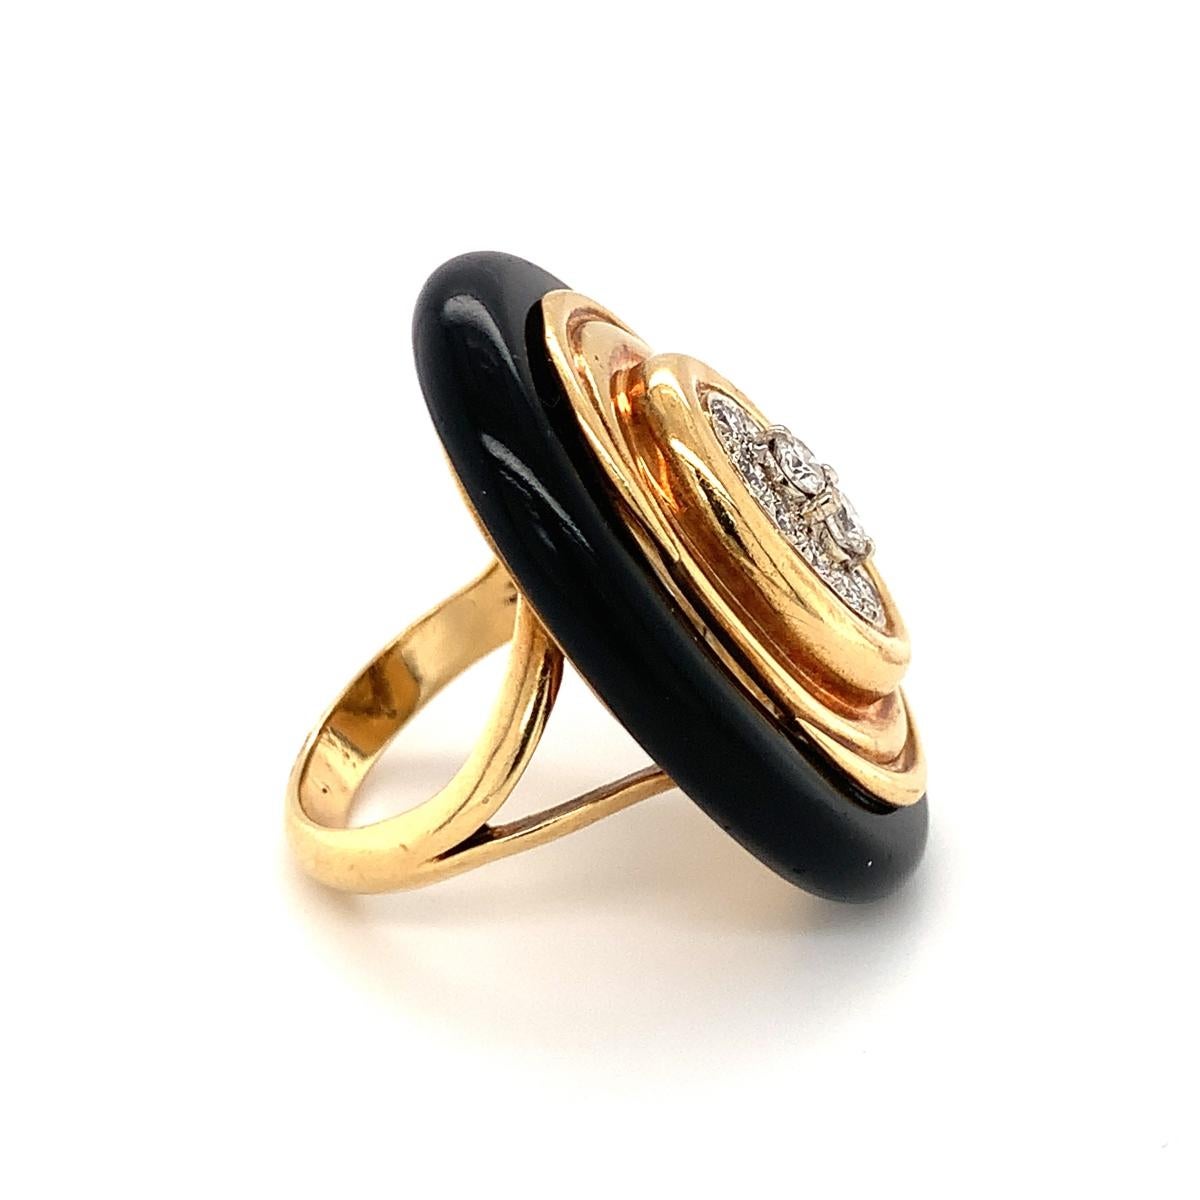 Women's Diamond and Onyx 18k Yellow Gold Ring by Emis, circa 1970s For Sale